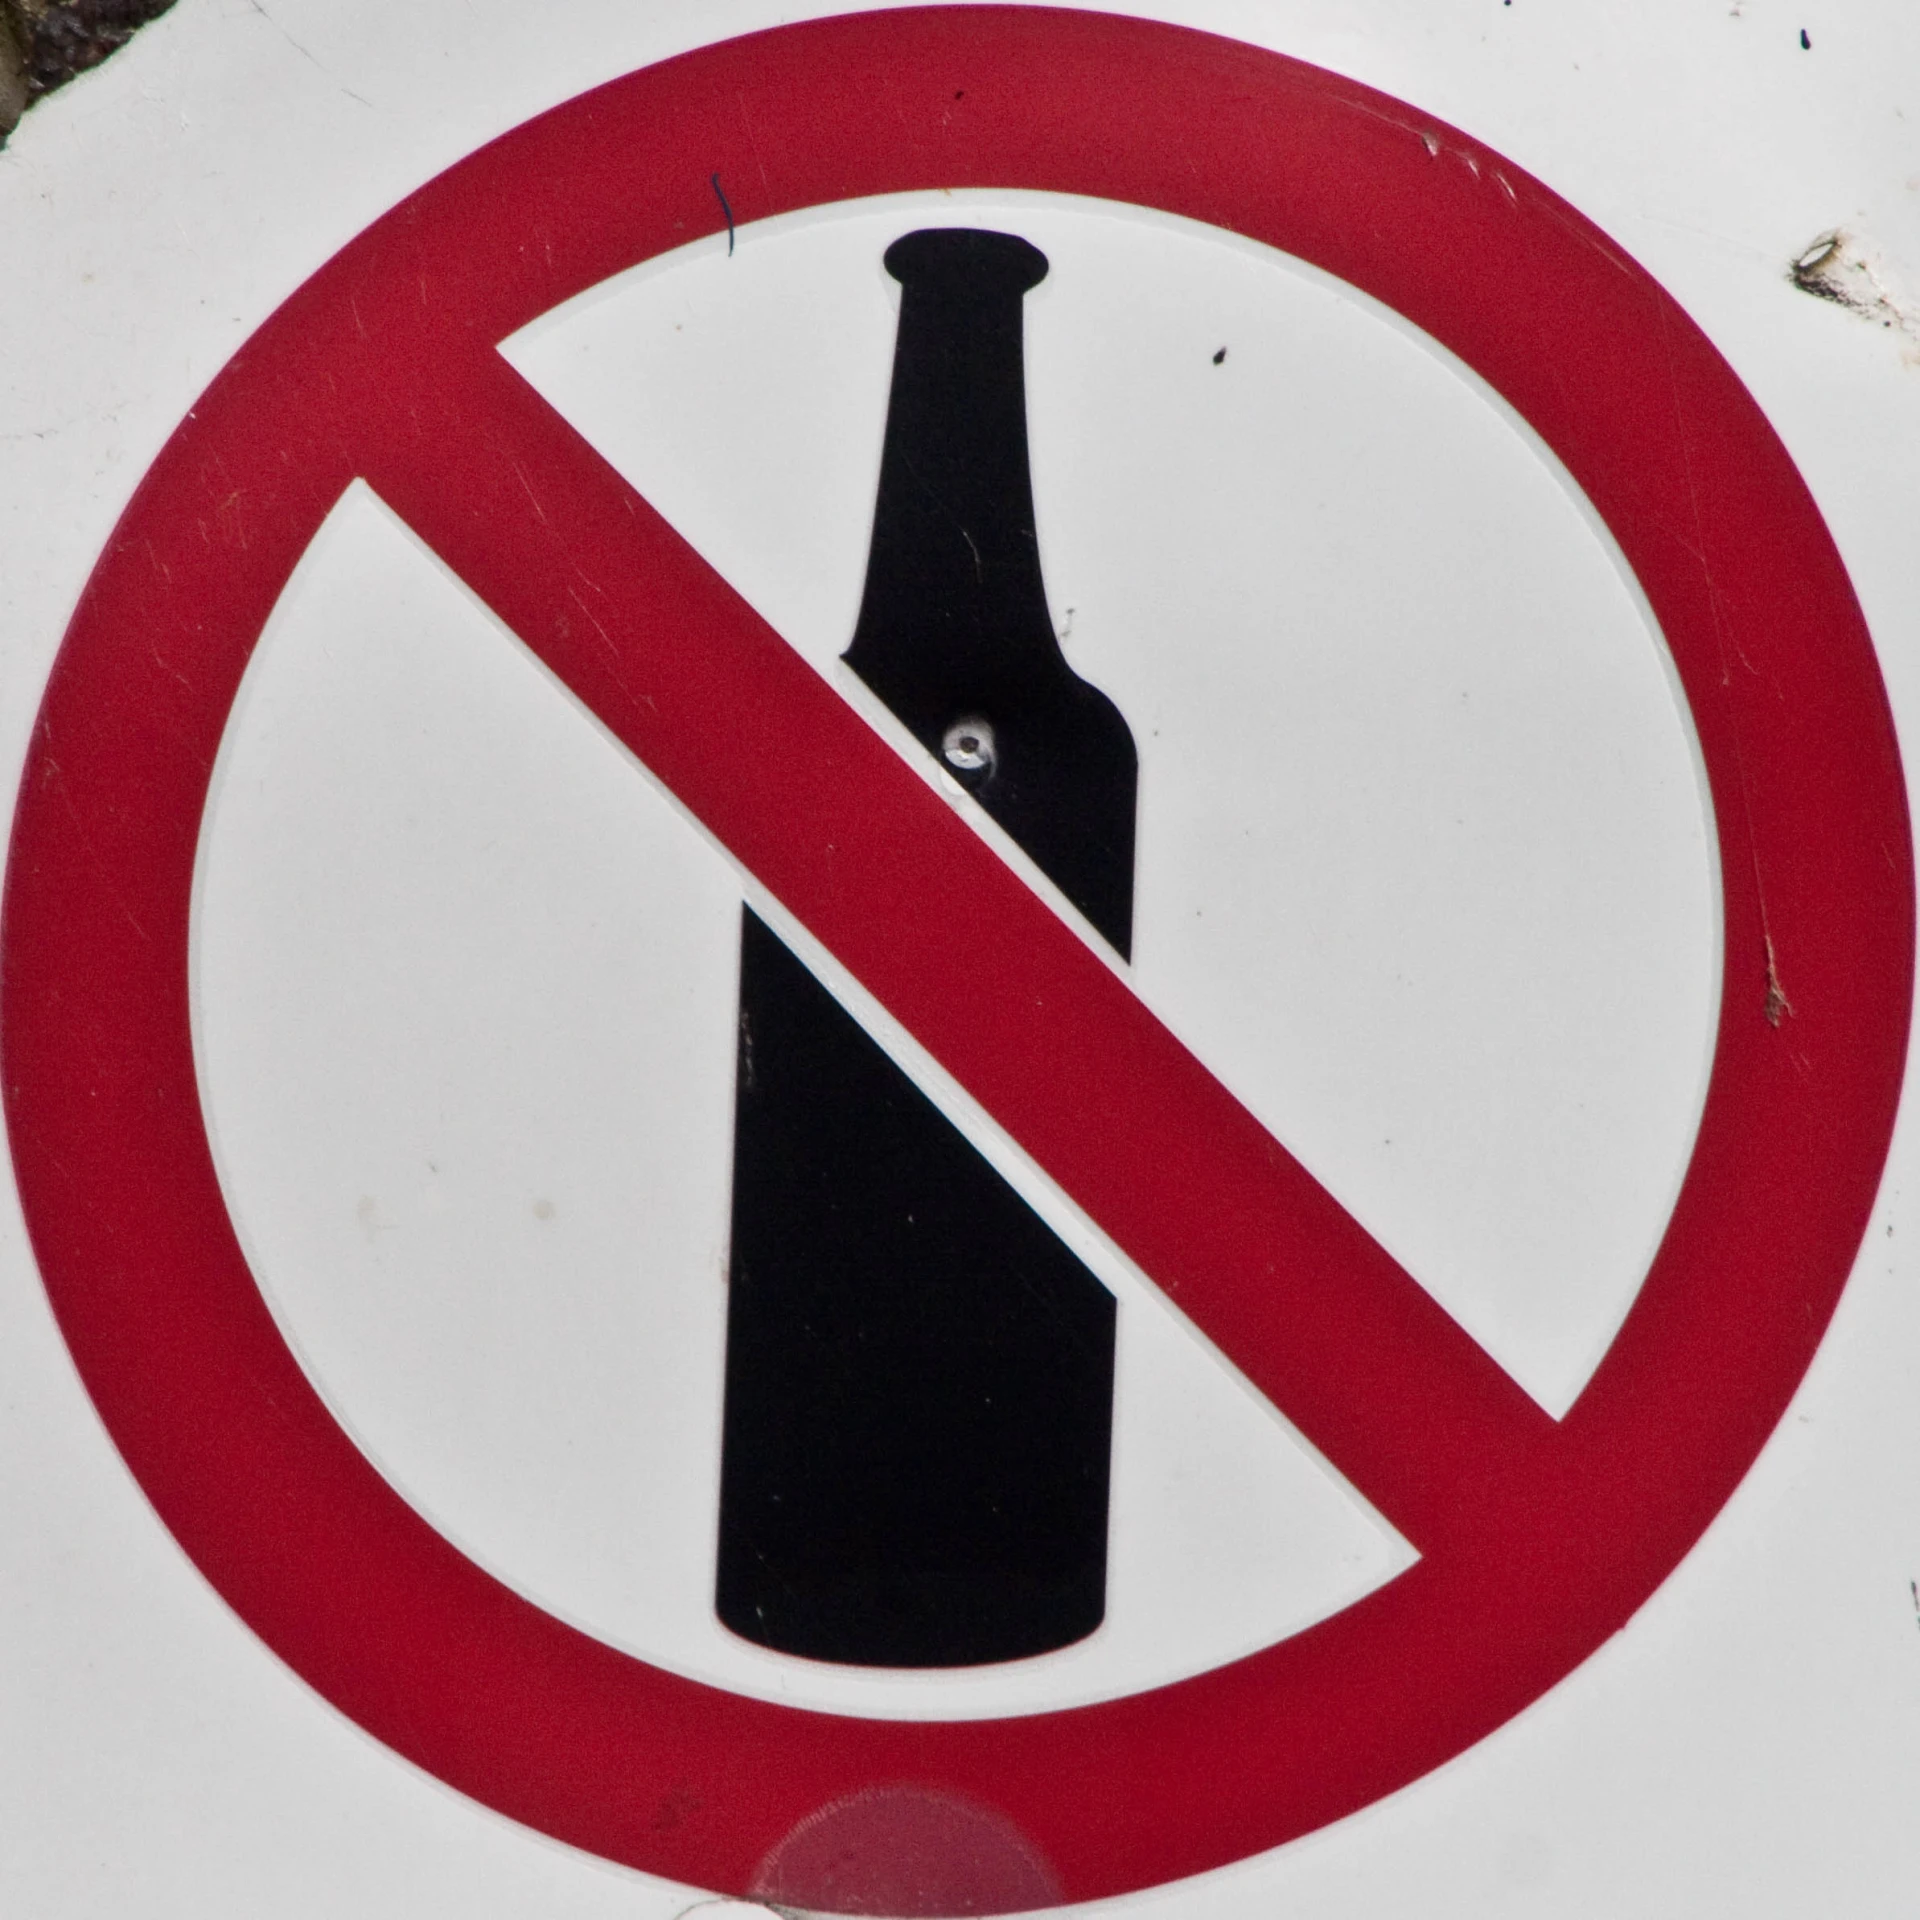 there is no alcohol allowed in this area